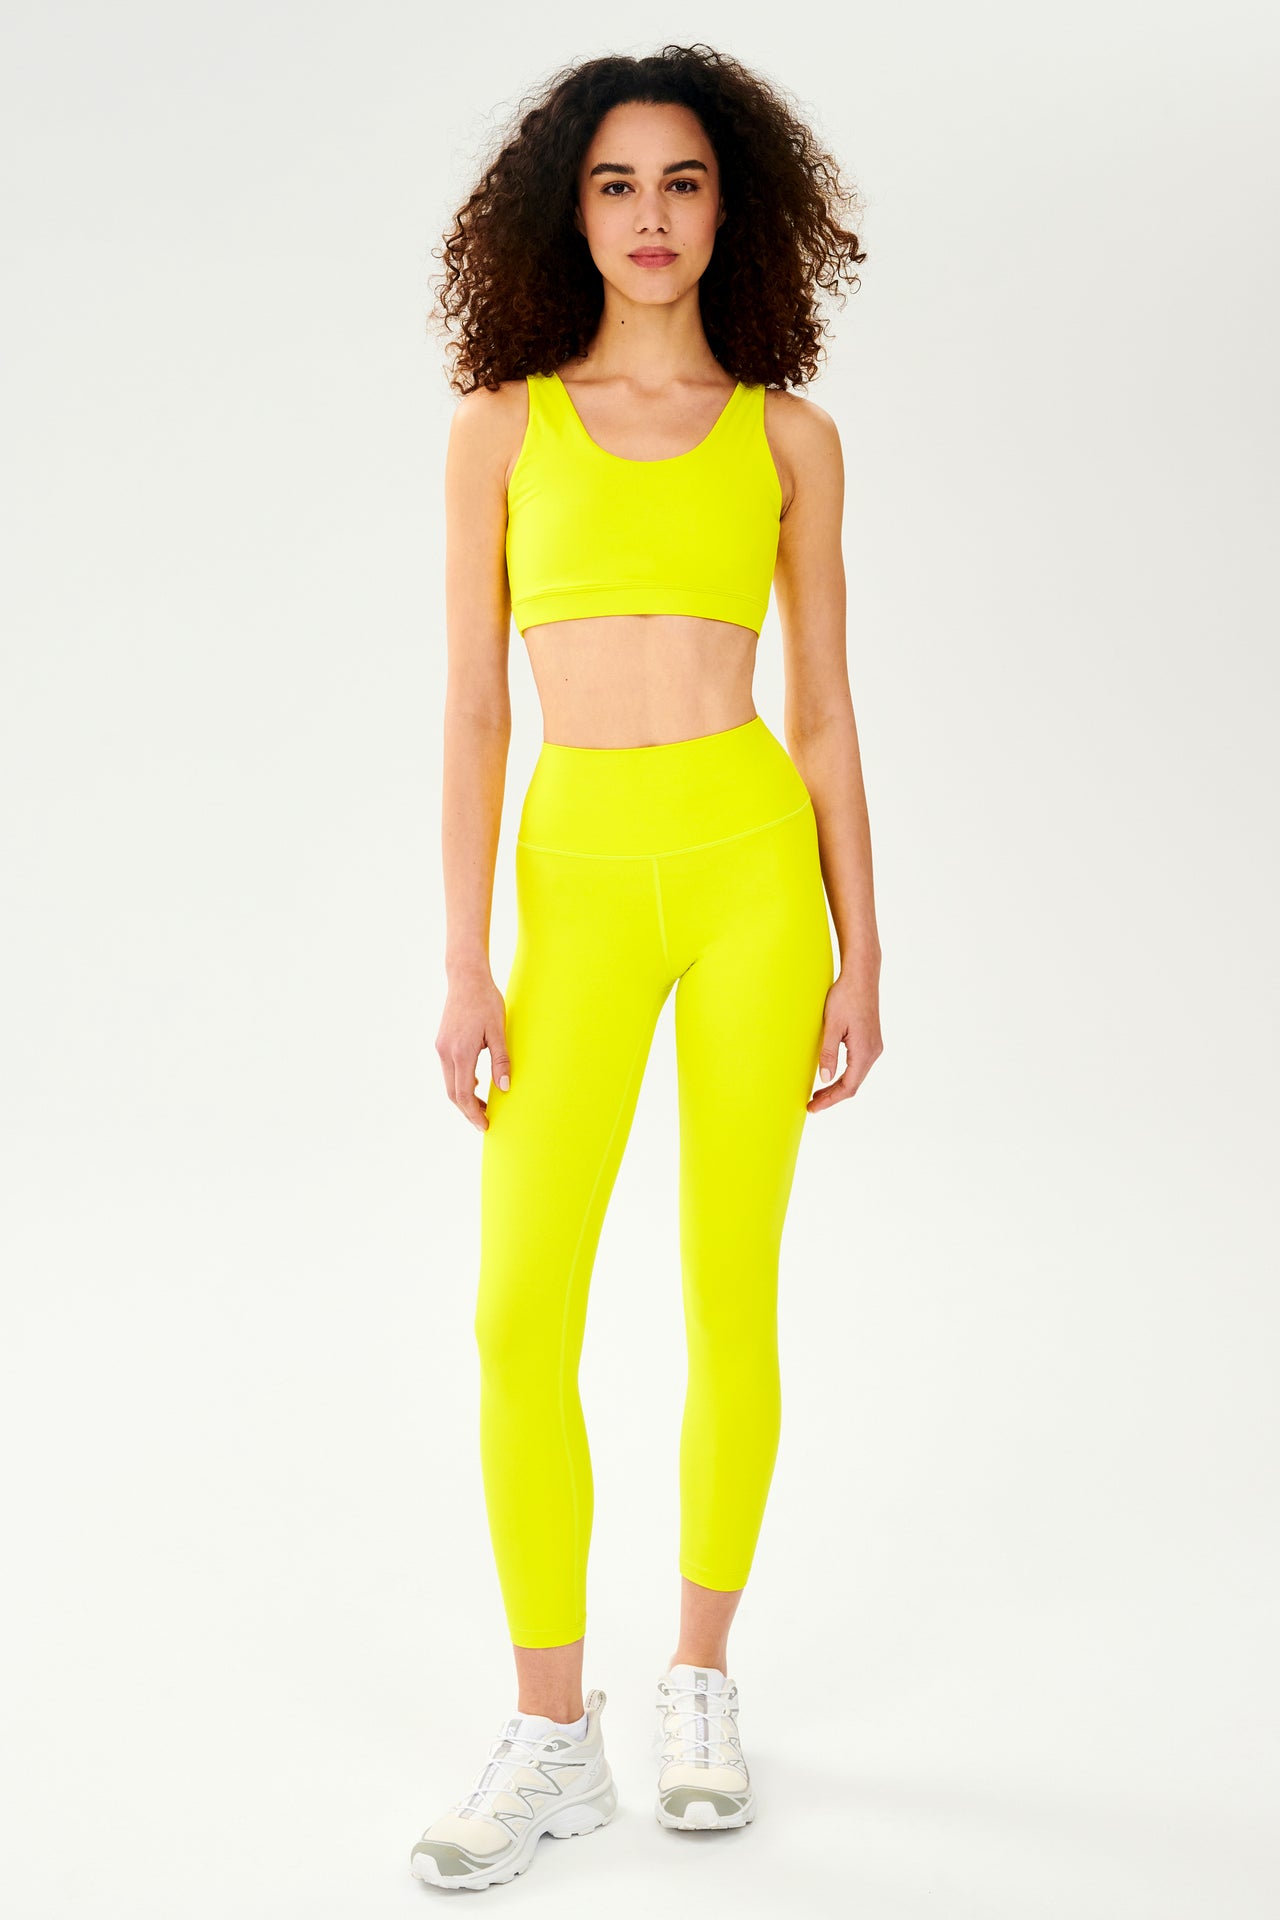 Front full view of woman with curly dark wearing bright yellow bra with bright yellow high waist  leggings and white shoes